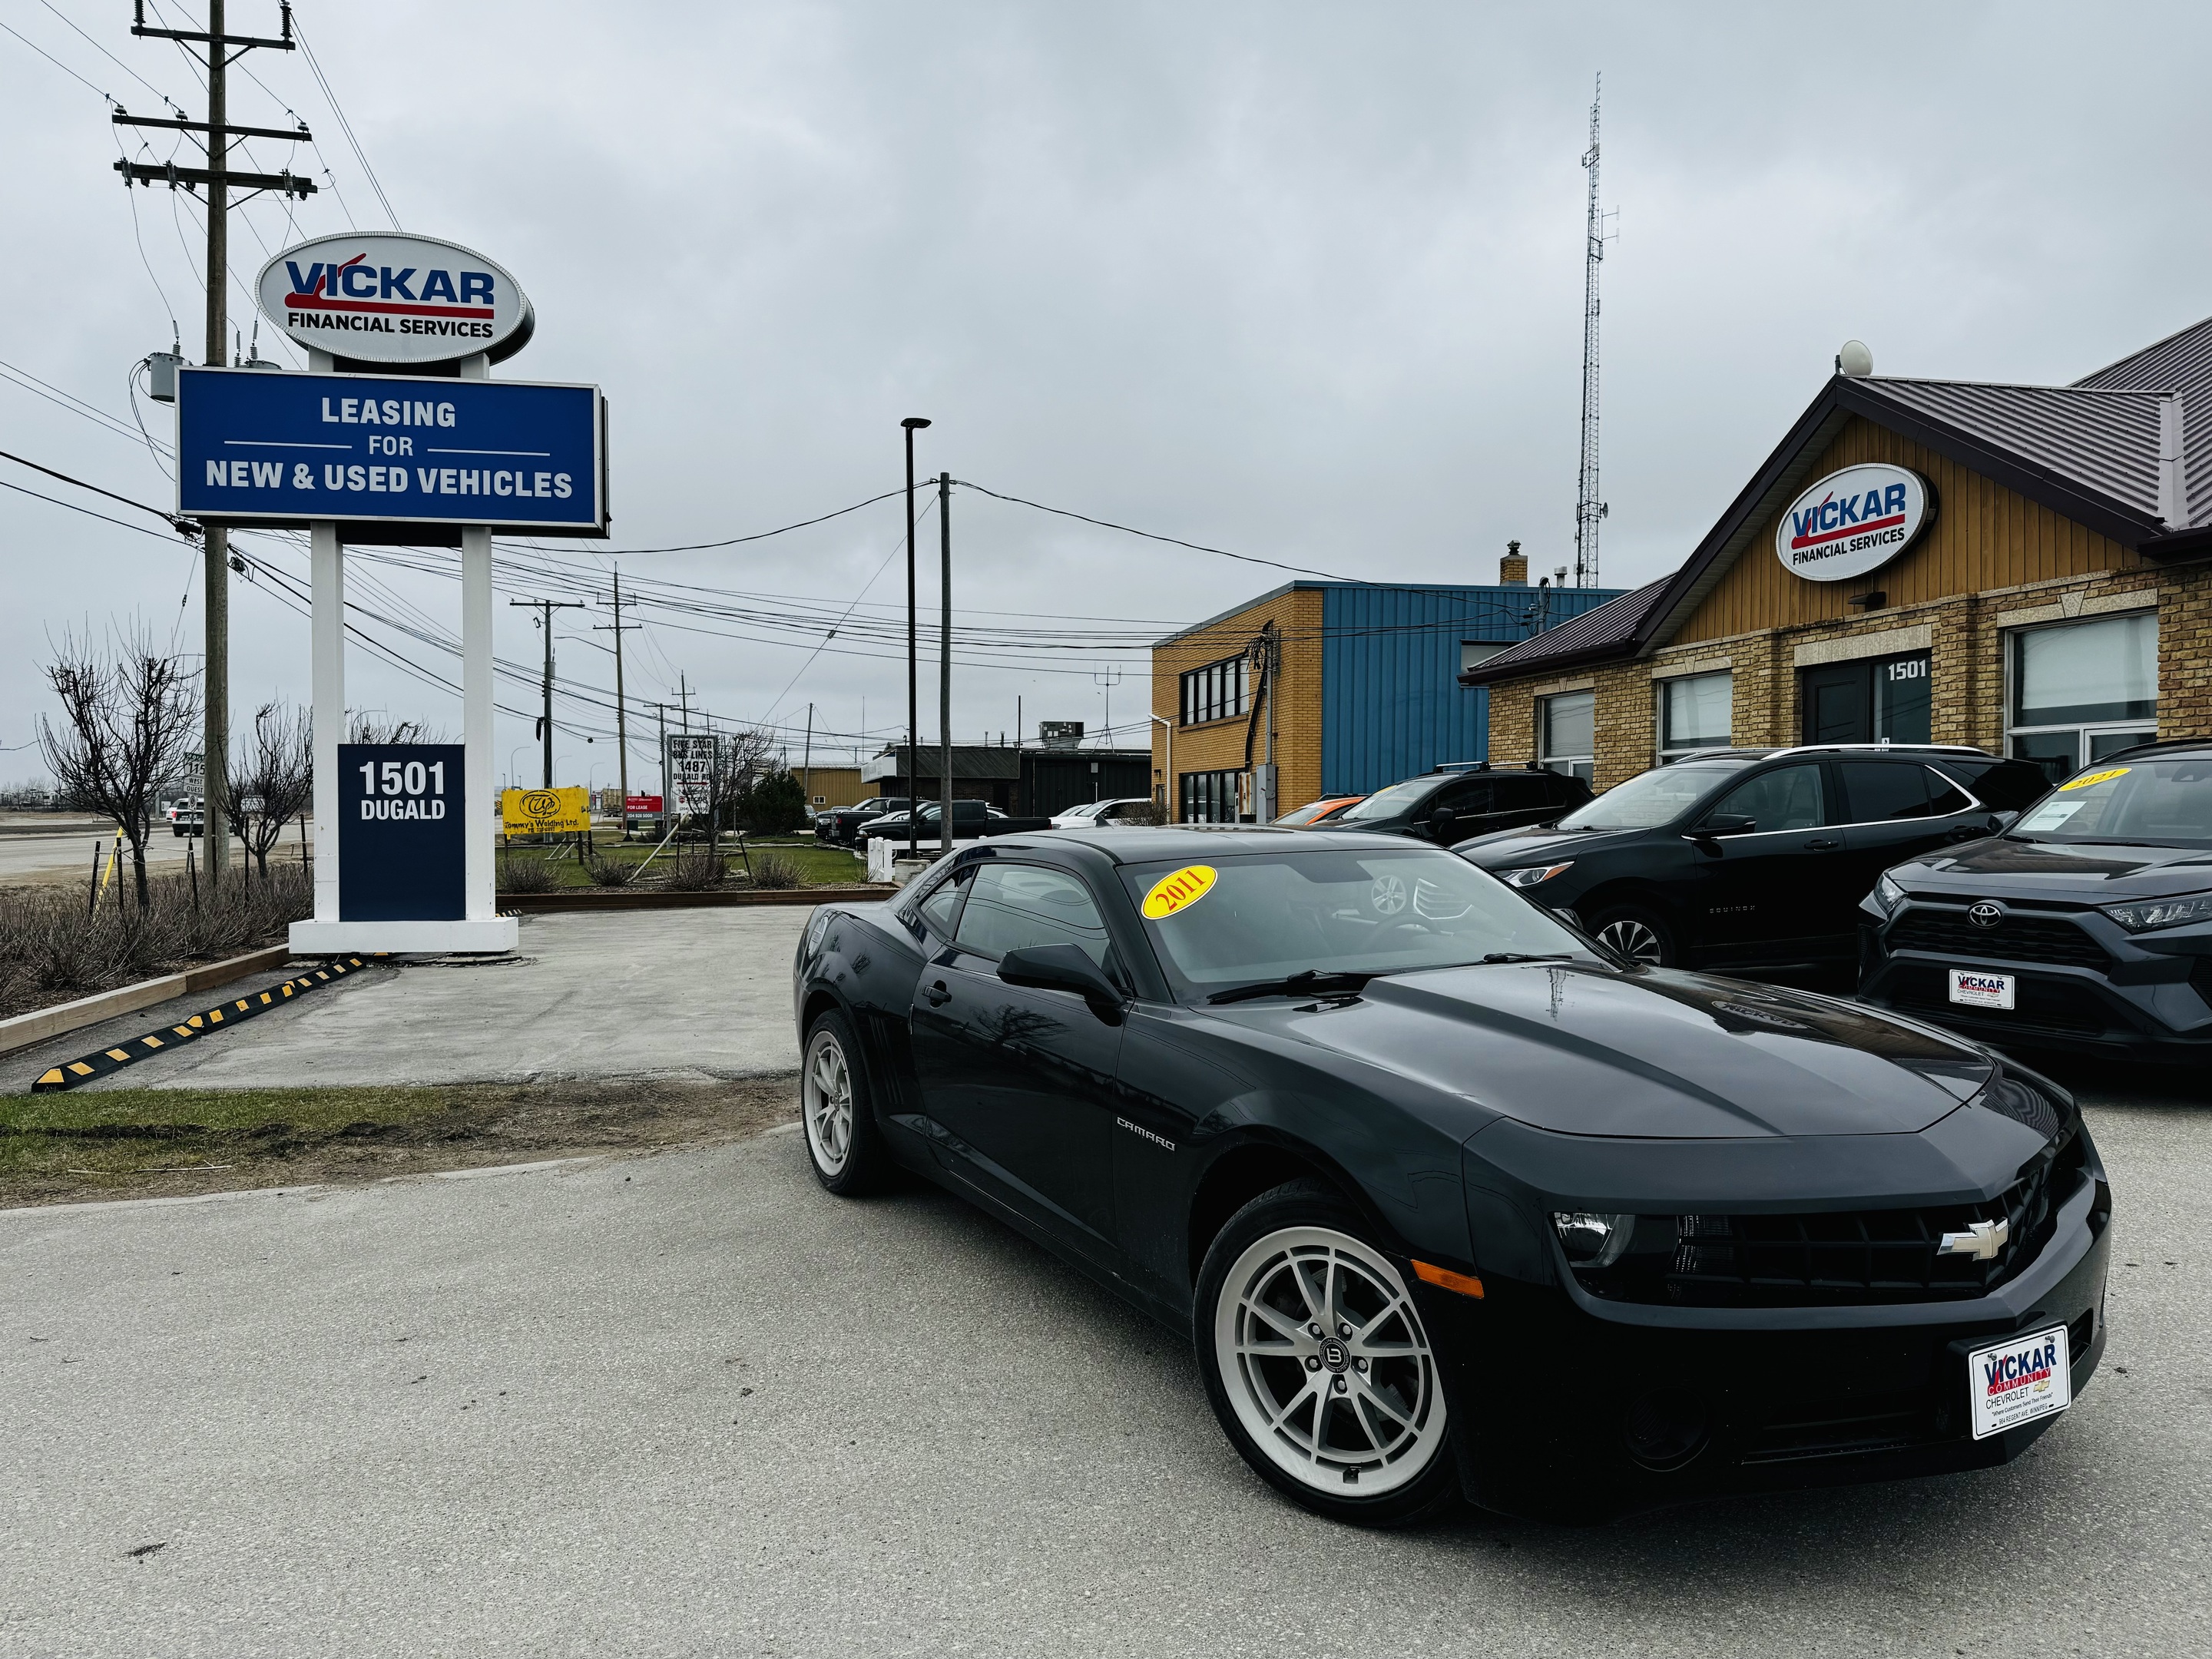 2011 Chevrolet Camaro 2dr Cpe 1LS -VERY LOW KMS!!!!!- Manual